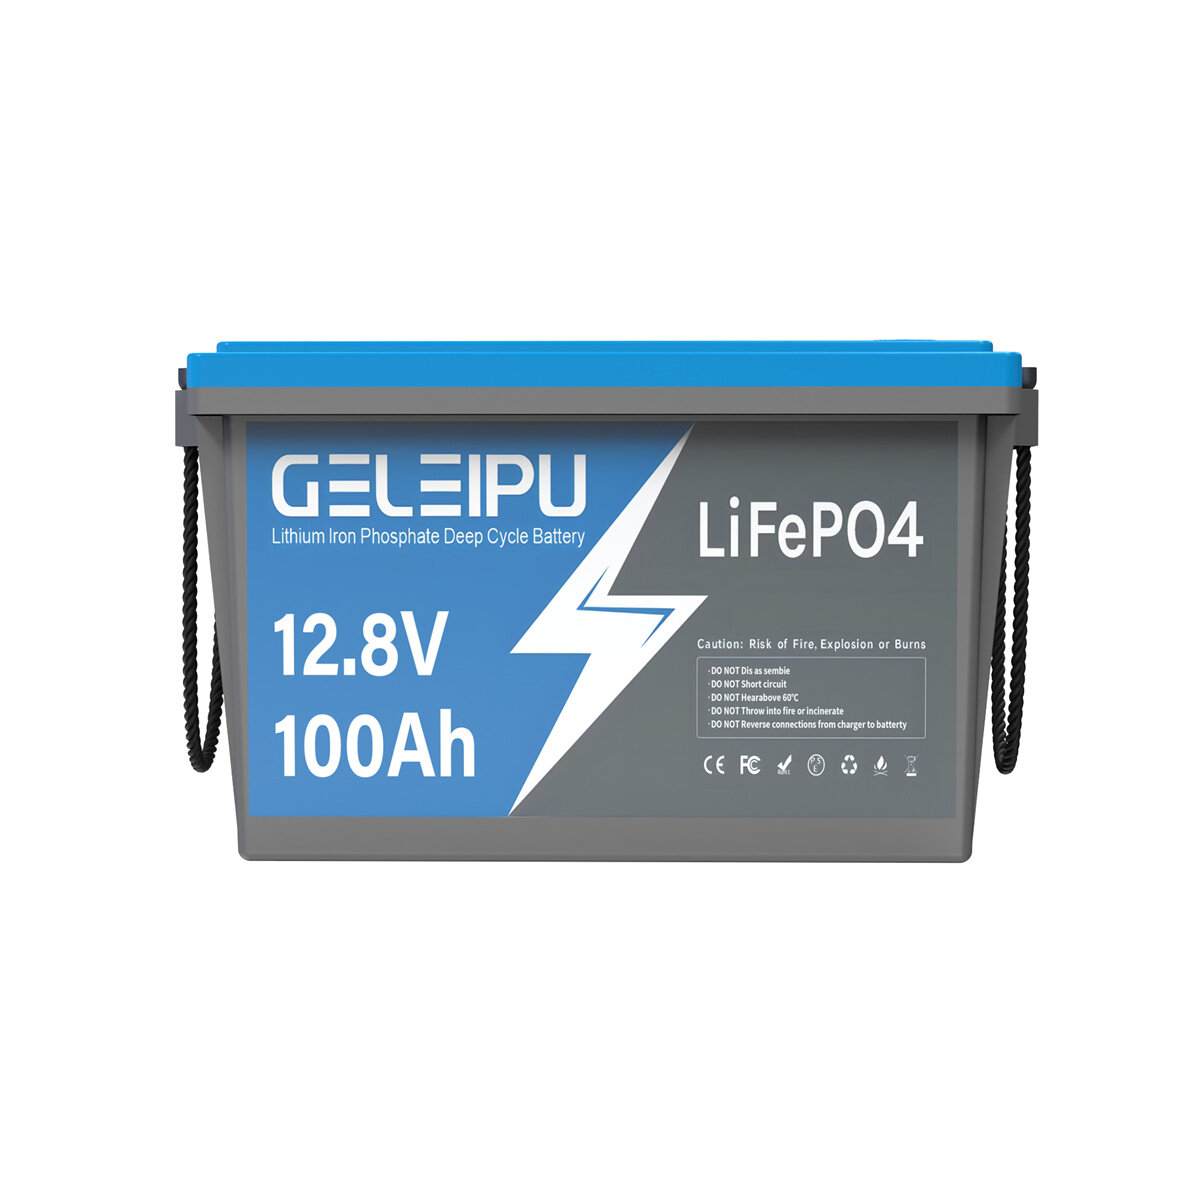 

[EU Direct] GELEIPU 12V 12.8V 100Ah LiFePO4 Battery, 1280Wh Rechargeable Lithium Battery Built-in 100A BMS, with 4000-15